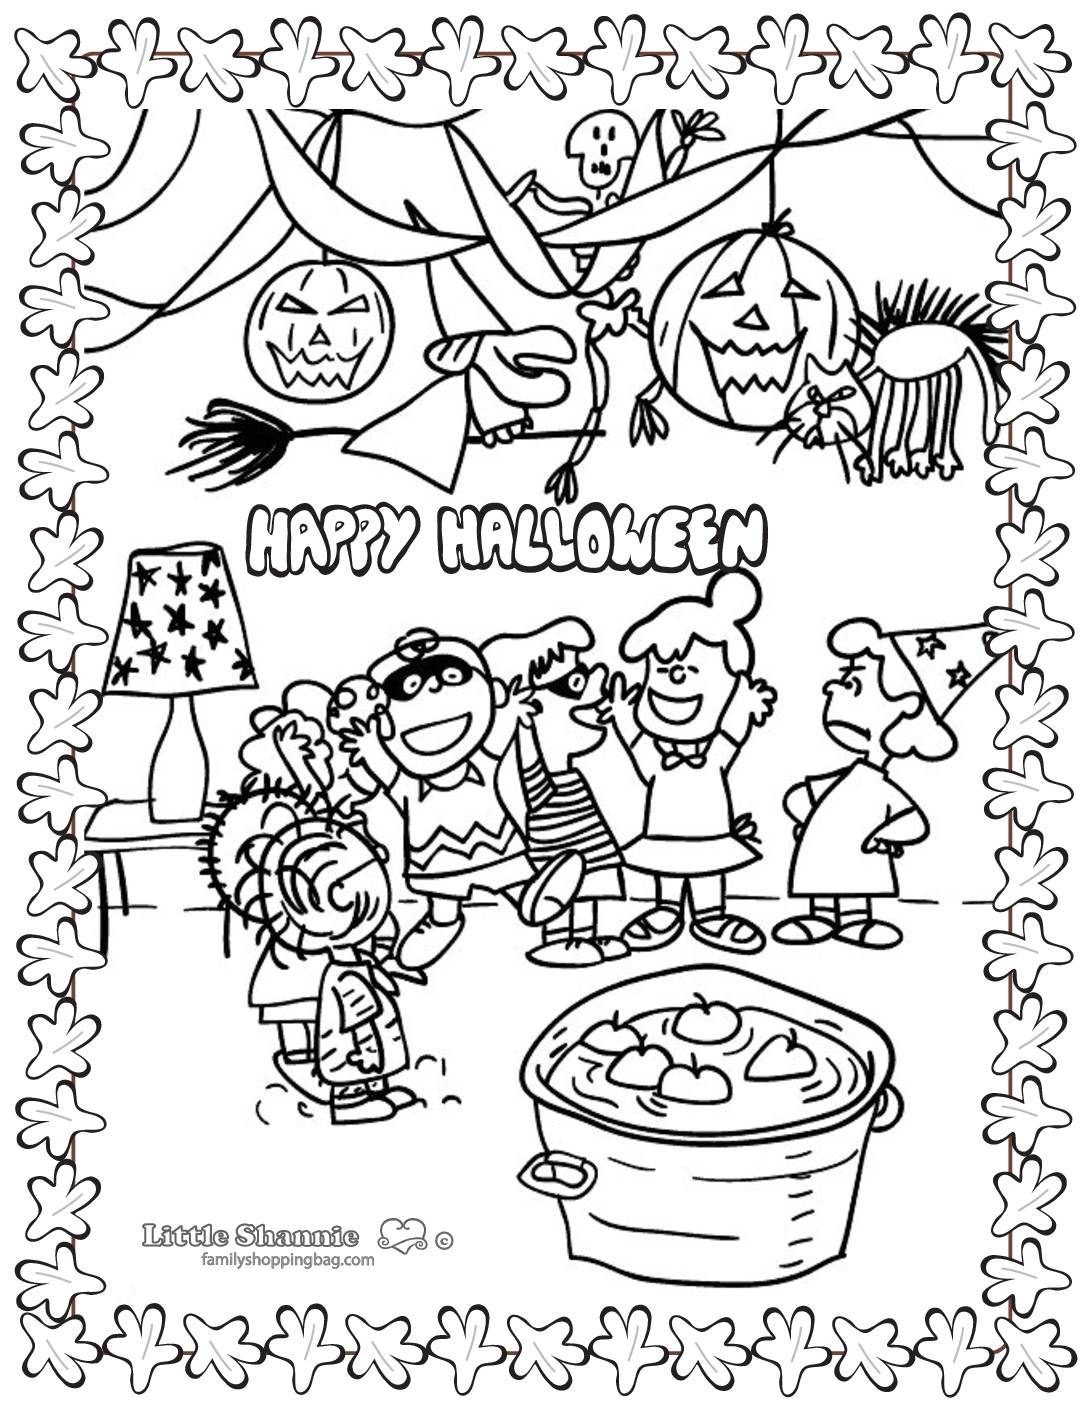 Coloring Page 5 Peanuts Halloween Coloring Pages